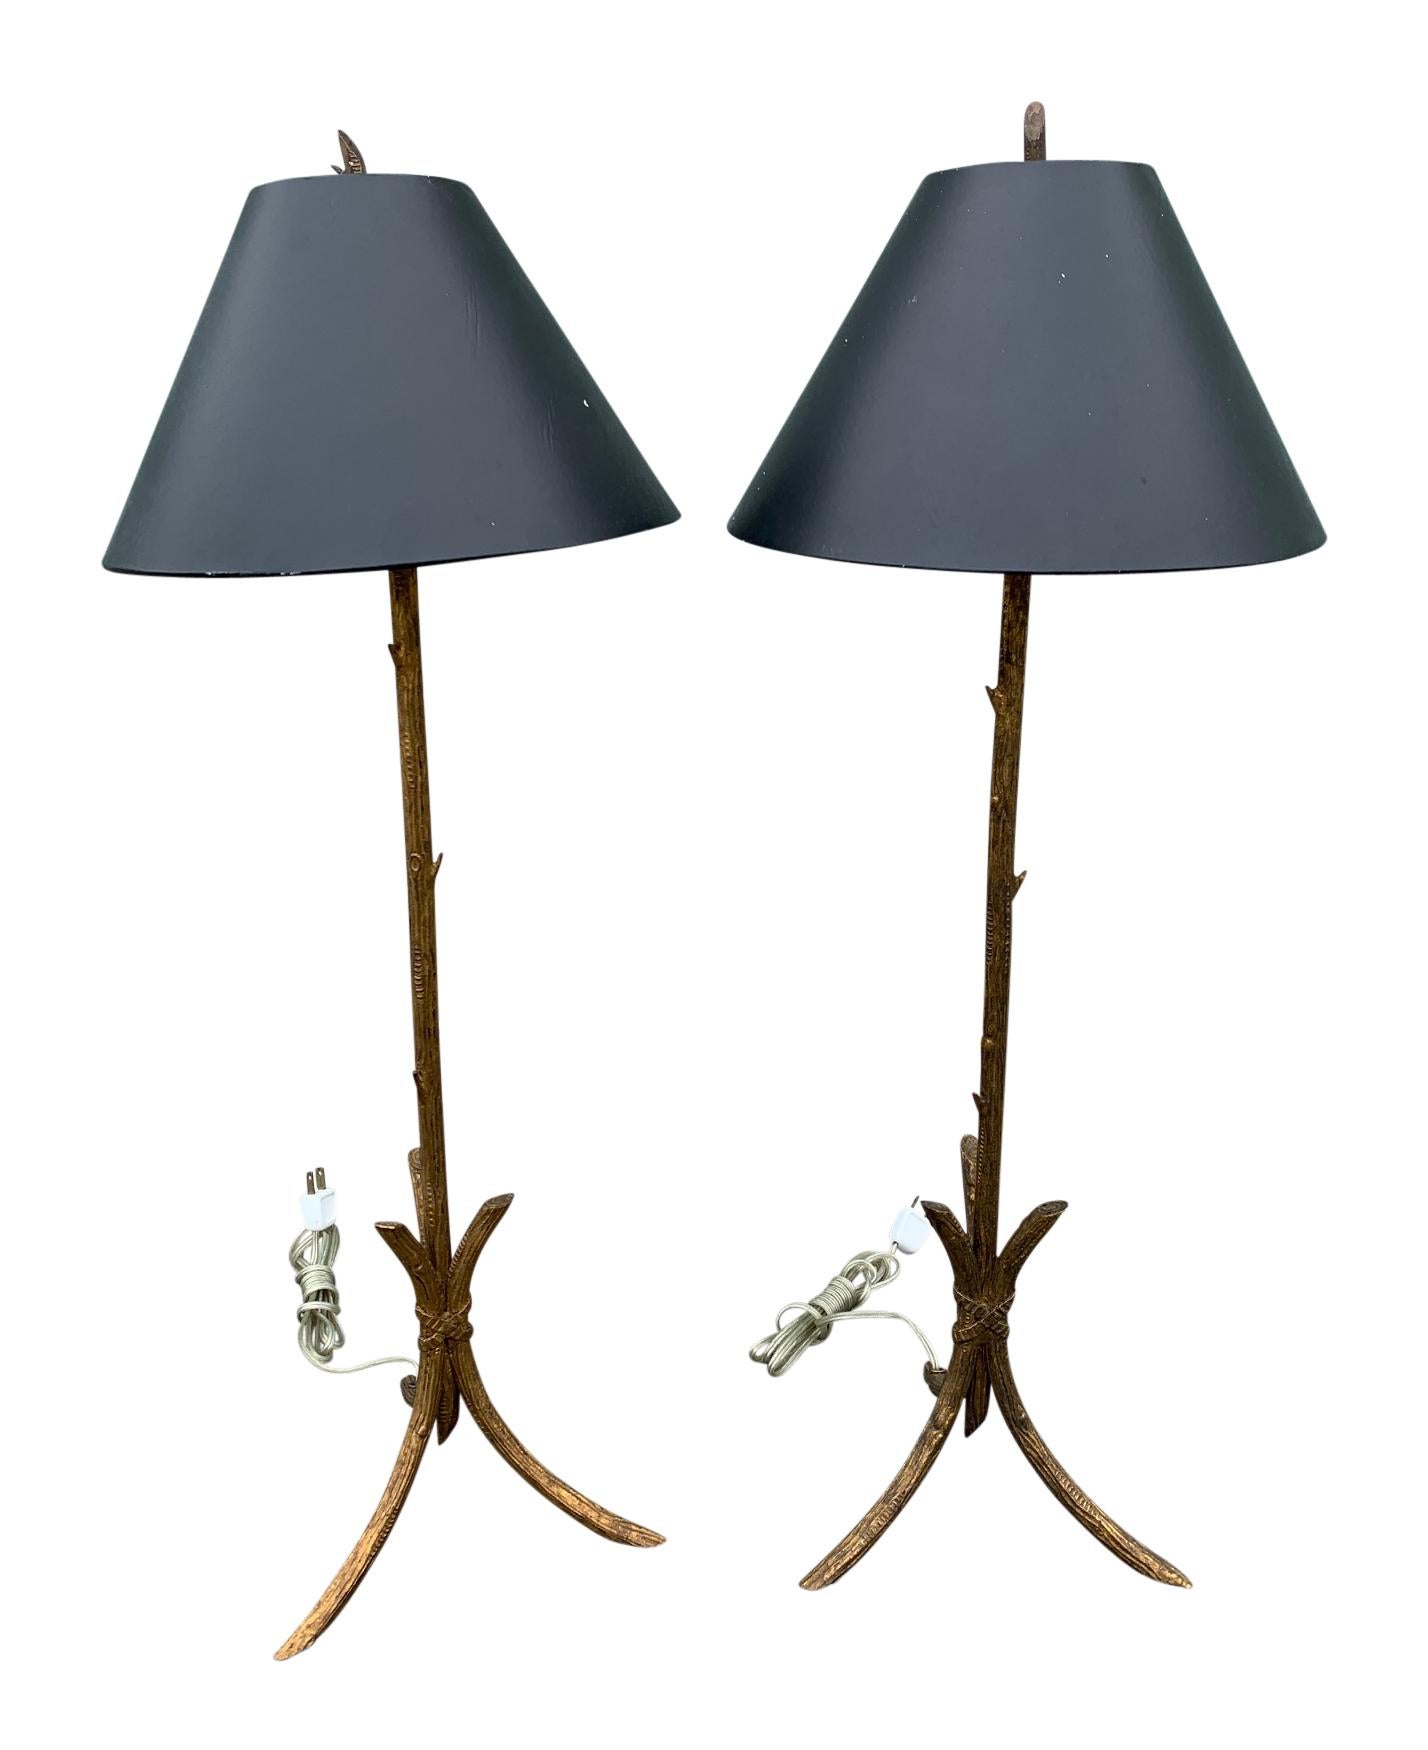 Pair of gold gilded faux bois lamps with original finials, in the manner of Giacometti, Mid-Century Modern.